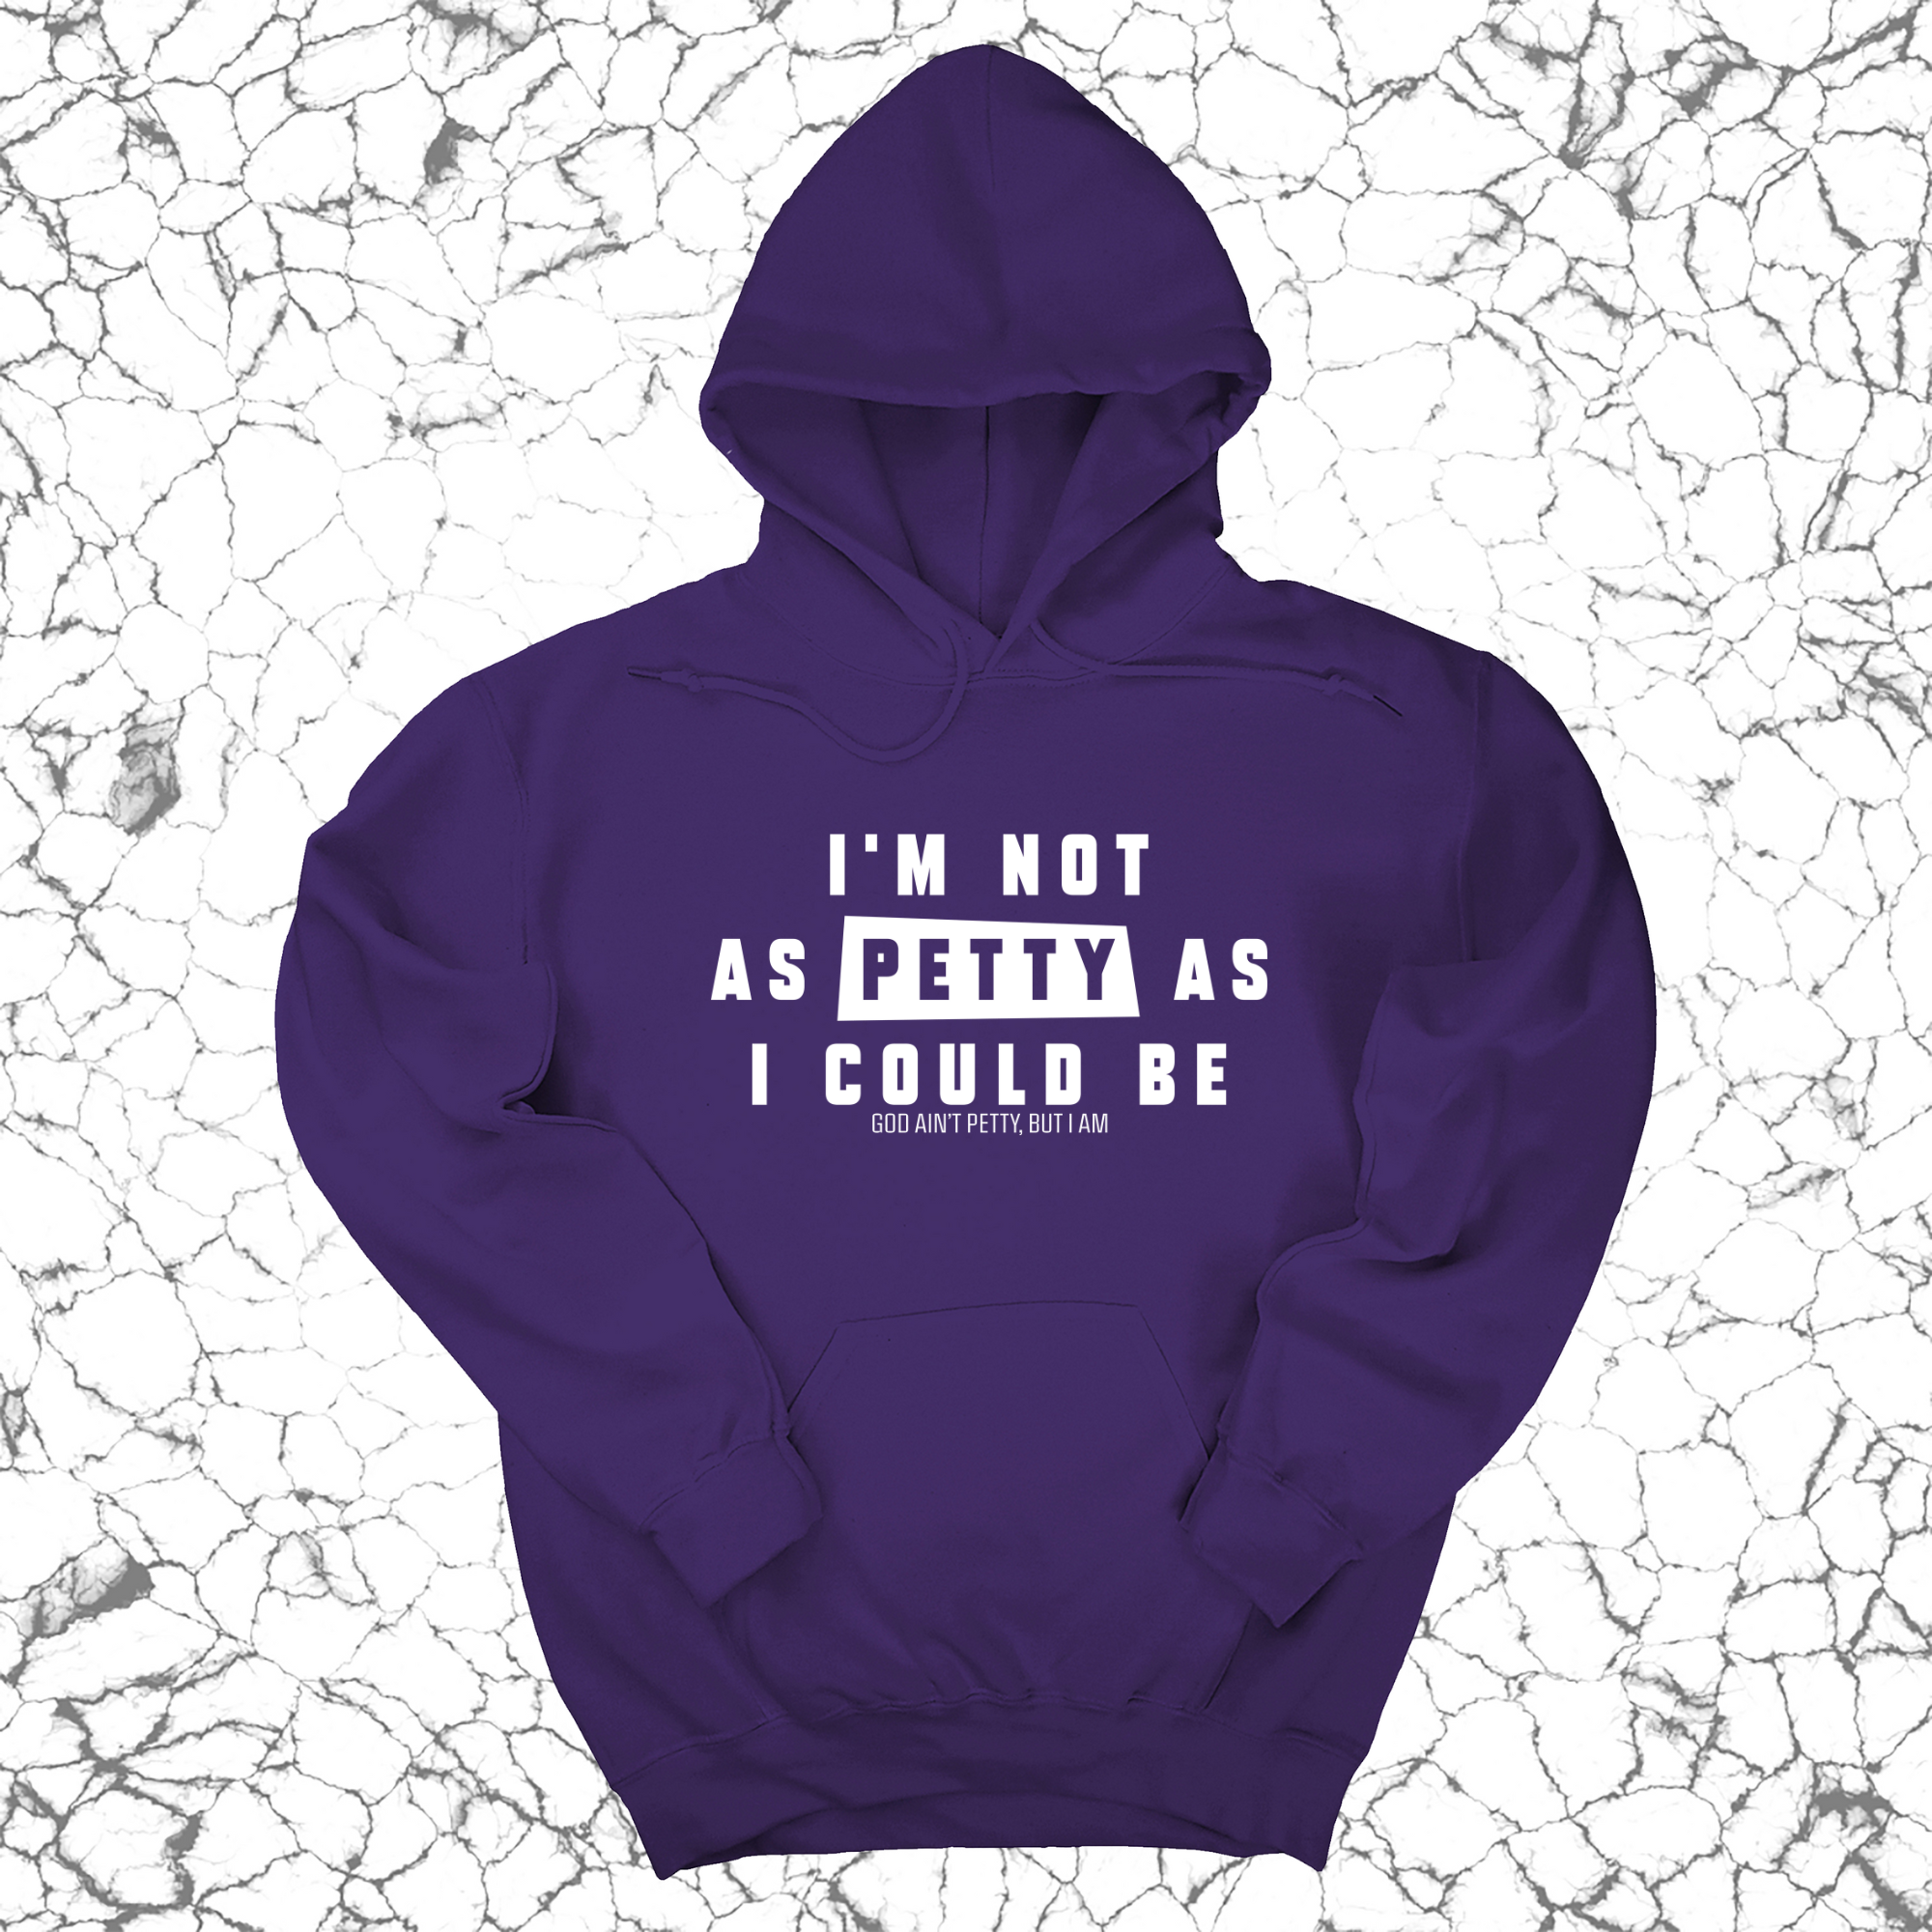 I'm not as petty as I could be Unisex Hoodie-Hoodie-The Original God Ain't Petty But I Am